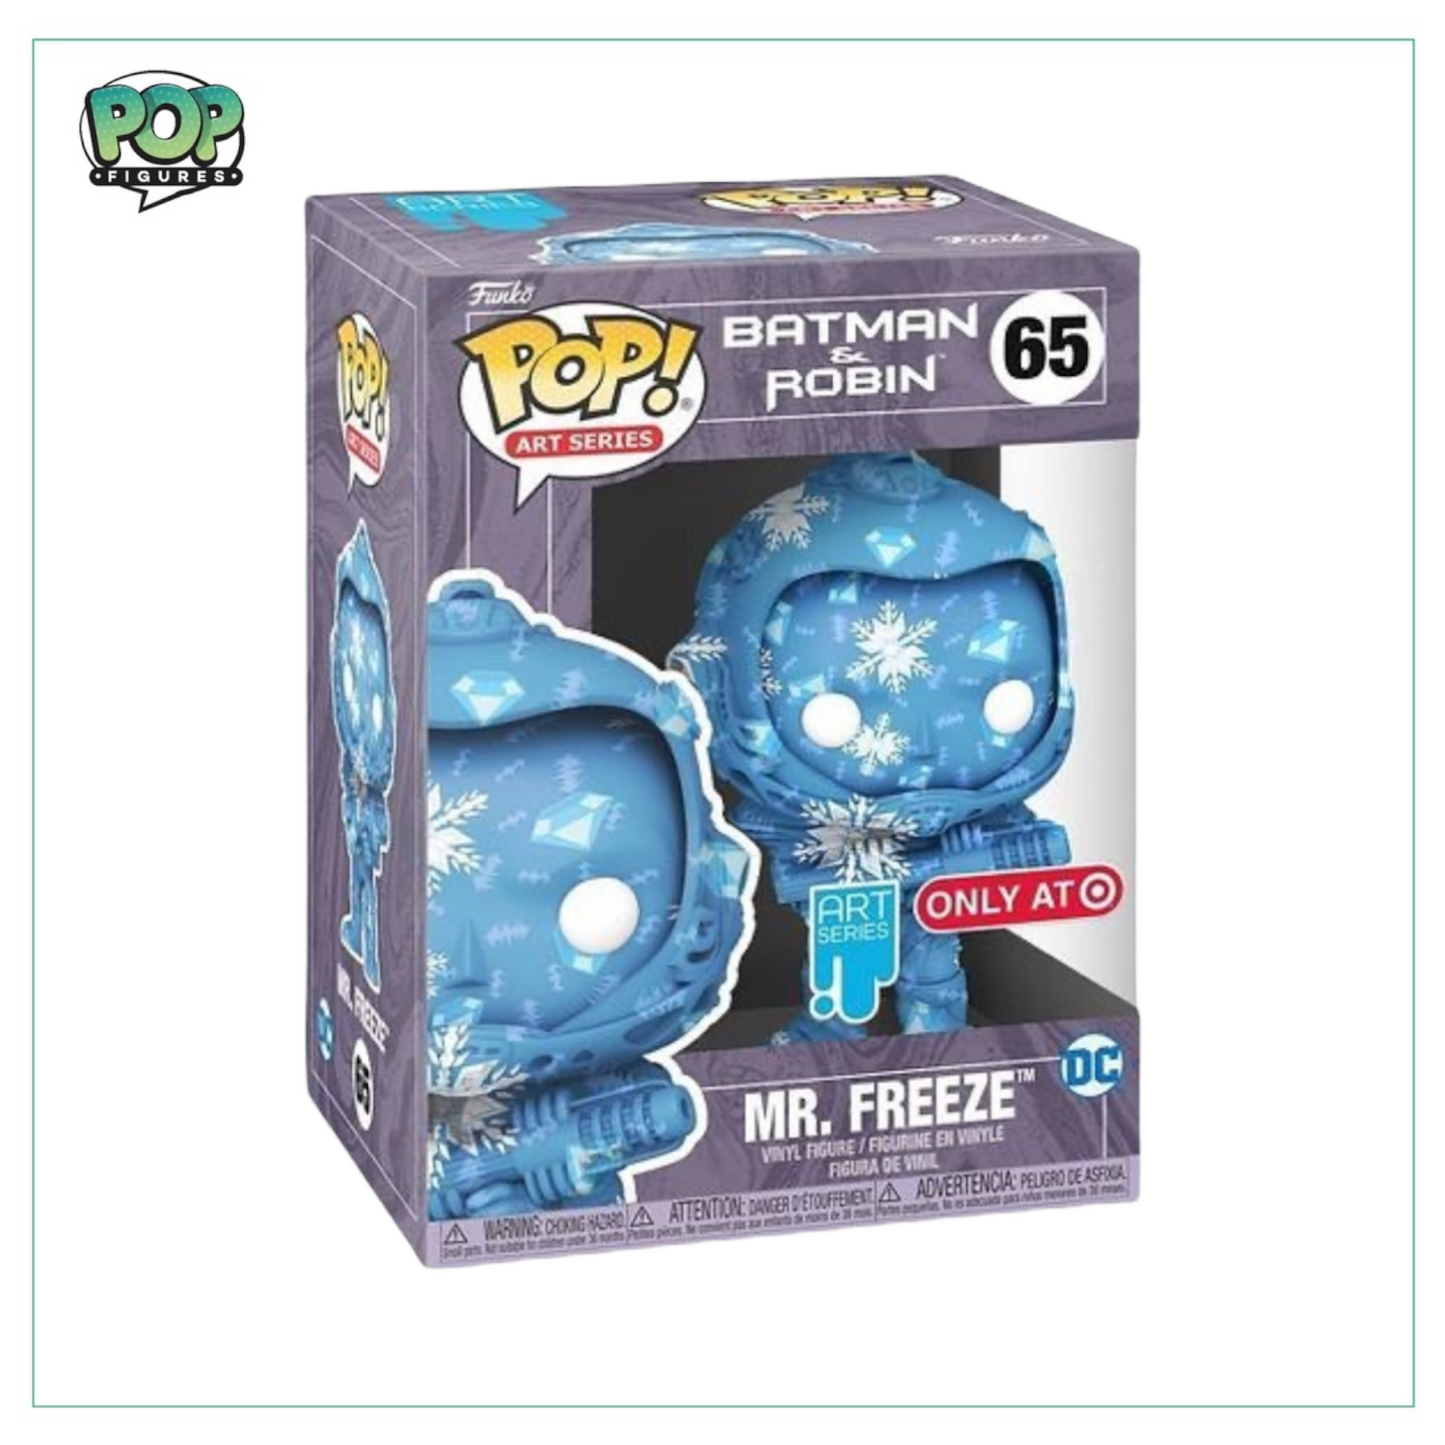 Mr Freeze #65 (Artist Series) Funko Pop! DC - Target Exclusive - Angry Cat